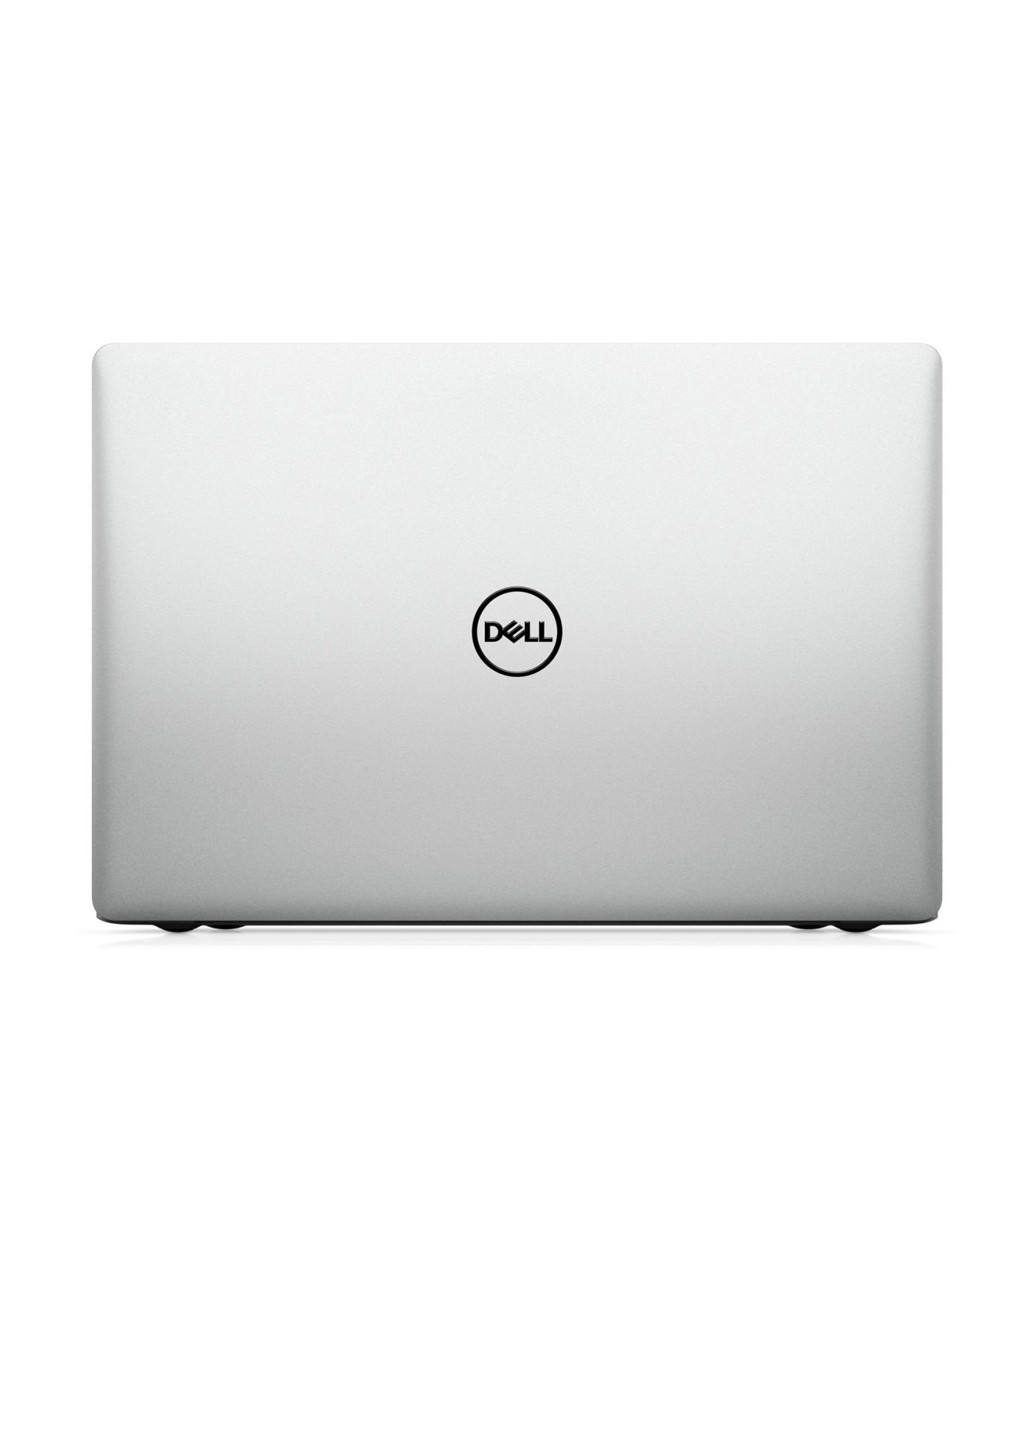 Ноутбук Dell inspiron 15 5570 (55i716s2r5m-lps) silver (137041897)